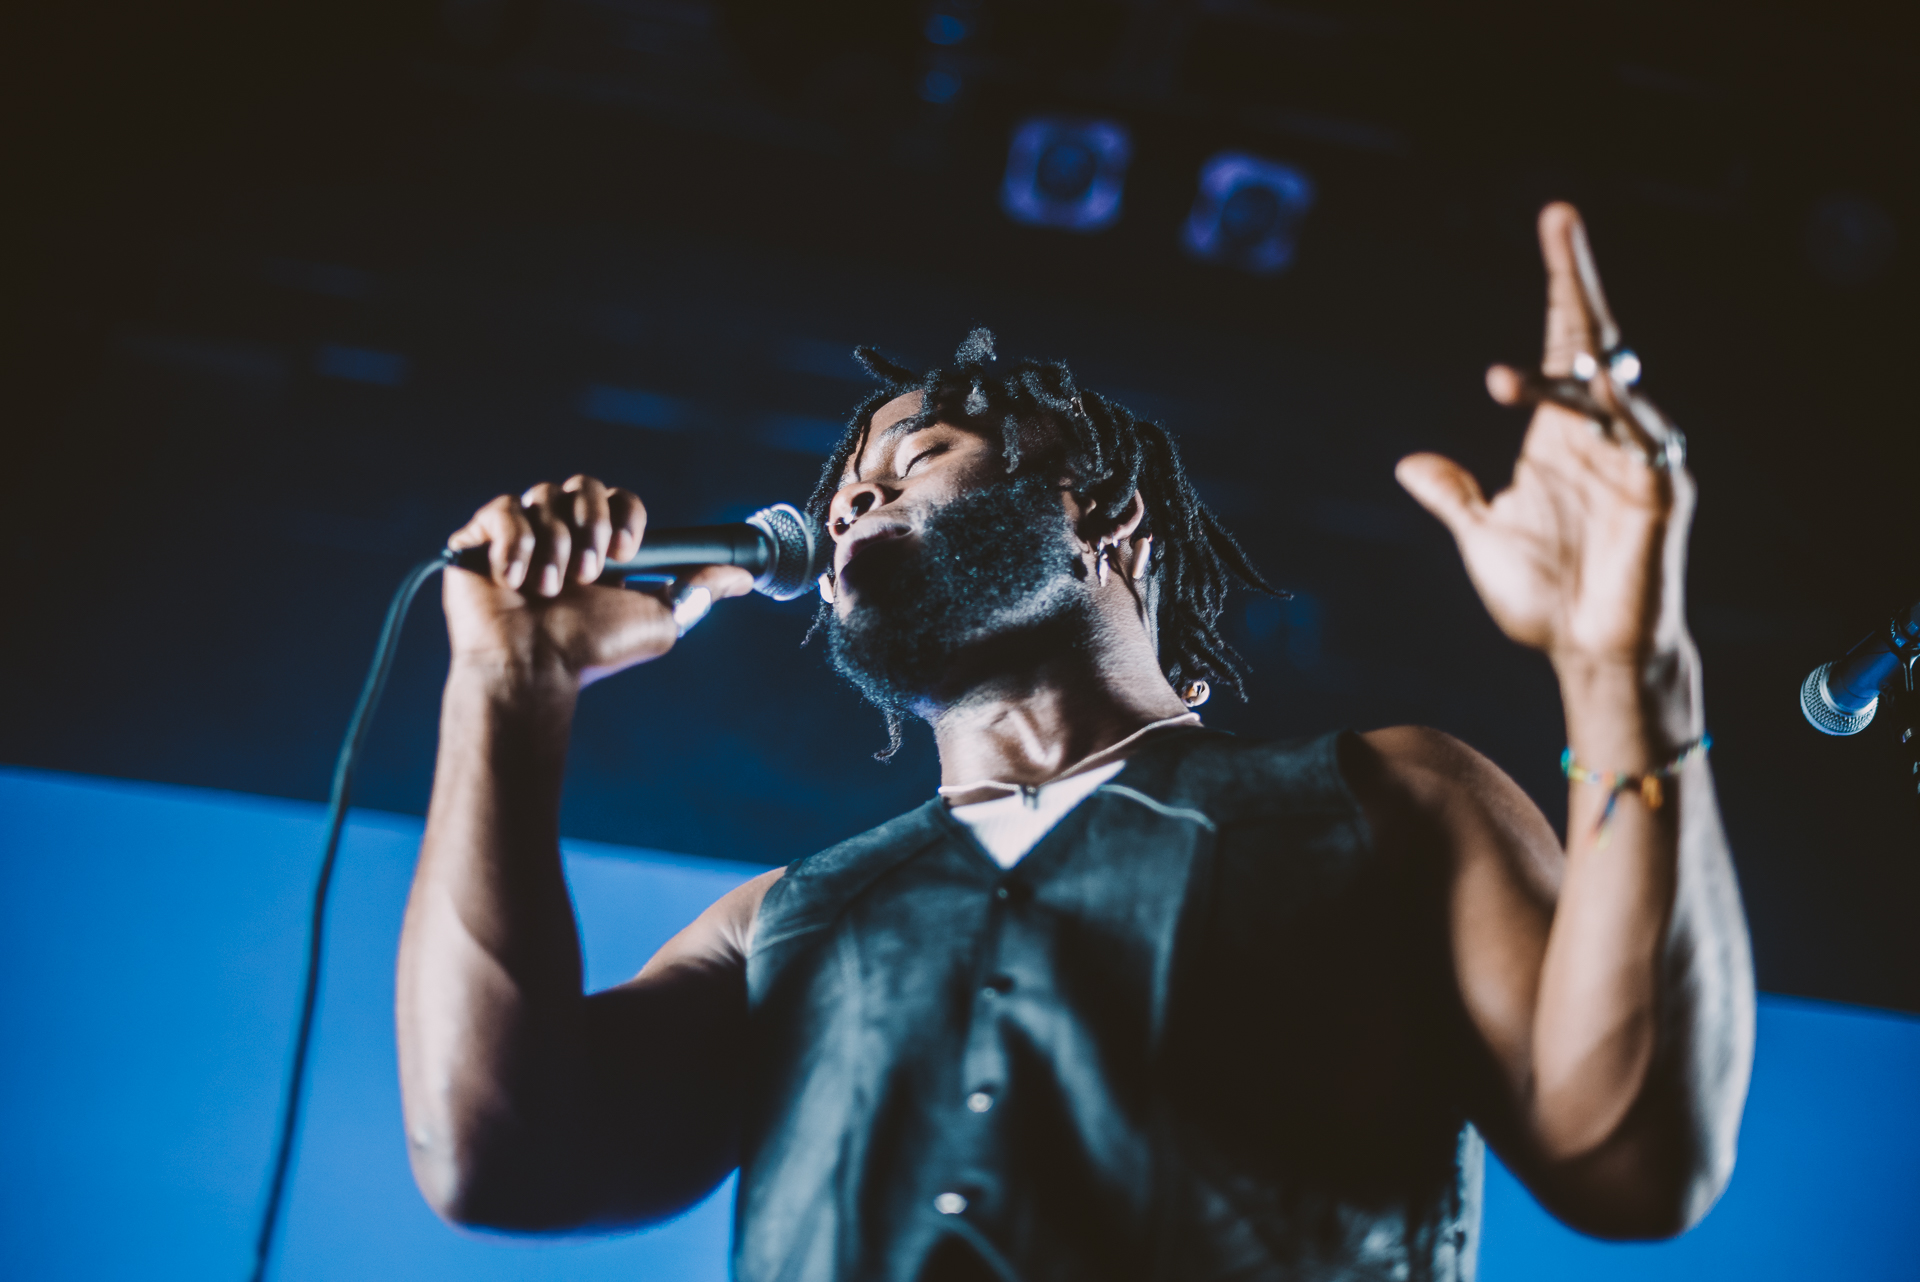 1_Young_Fathers-VENUE-Timothy_Nguyen-20181117 (7 of 23).jpg